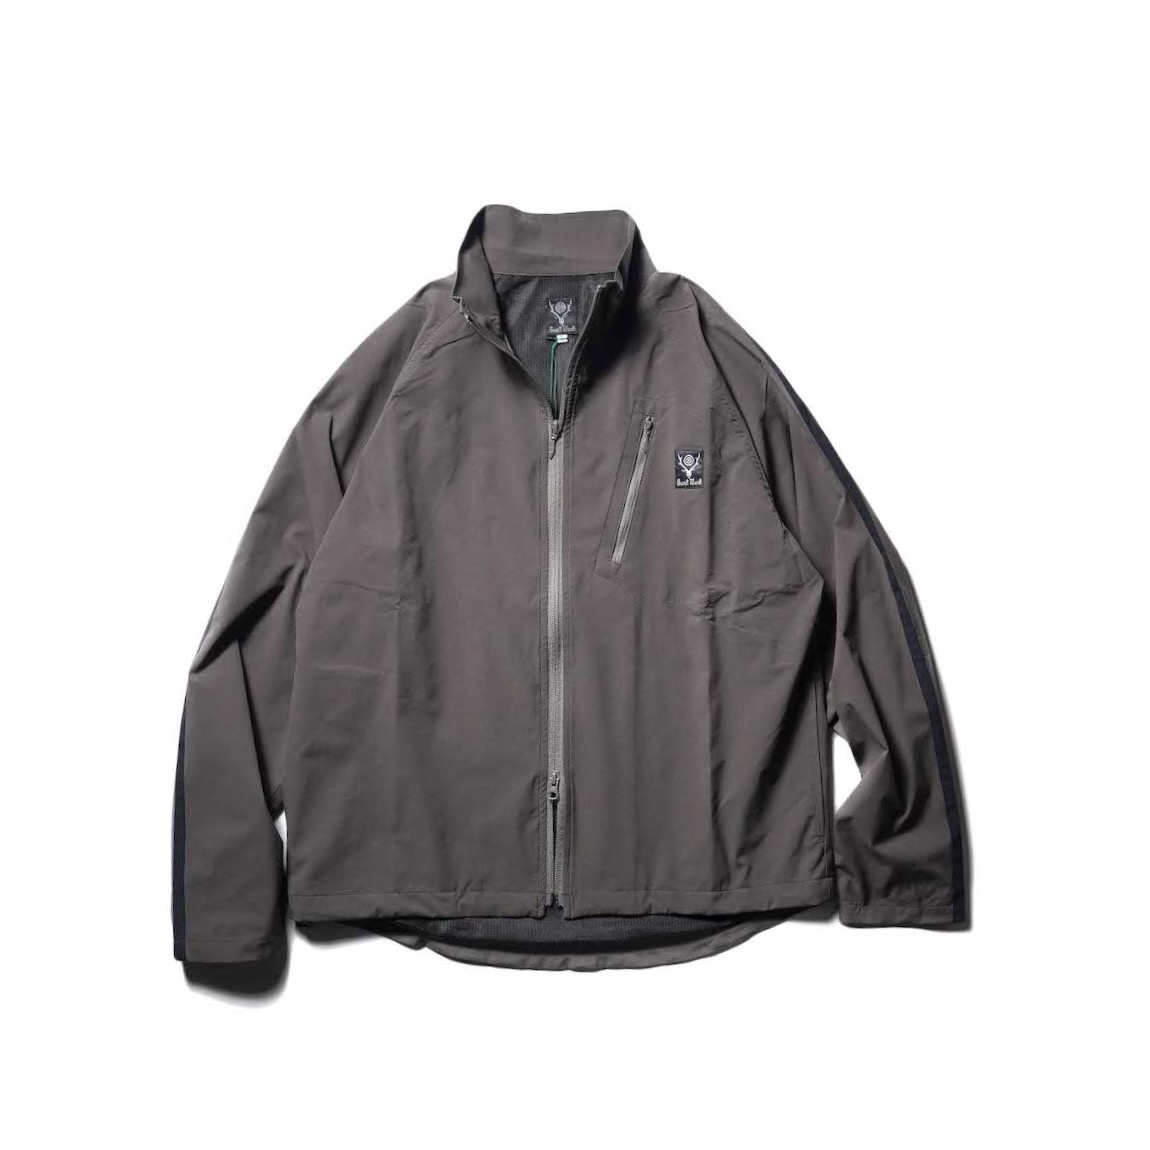 South2 West8 / L/S S.L.Zipped Trail Shirt - Poly Ripstop (Charcoal)